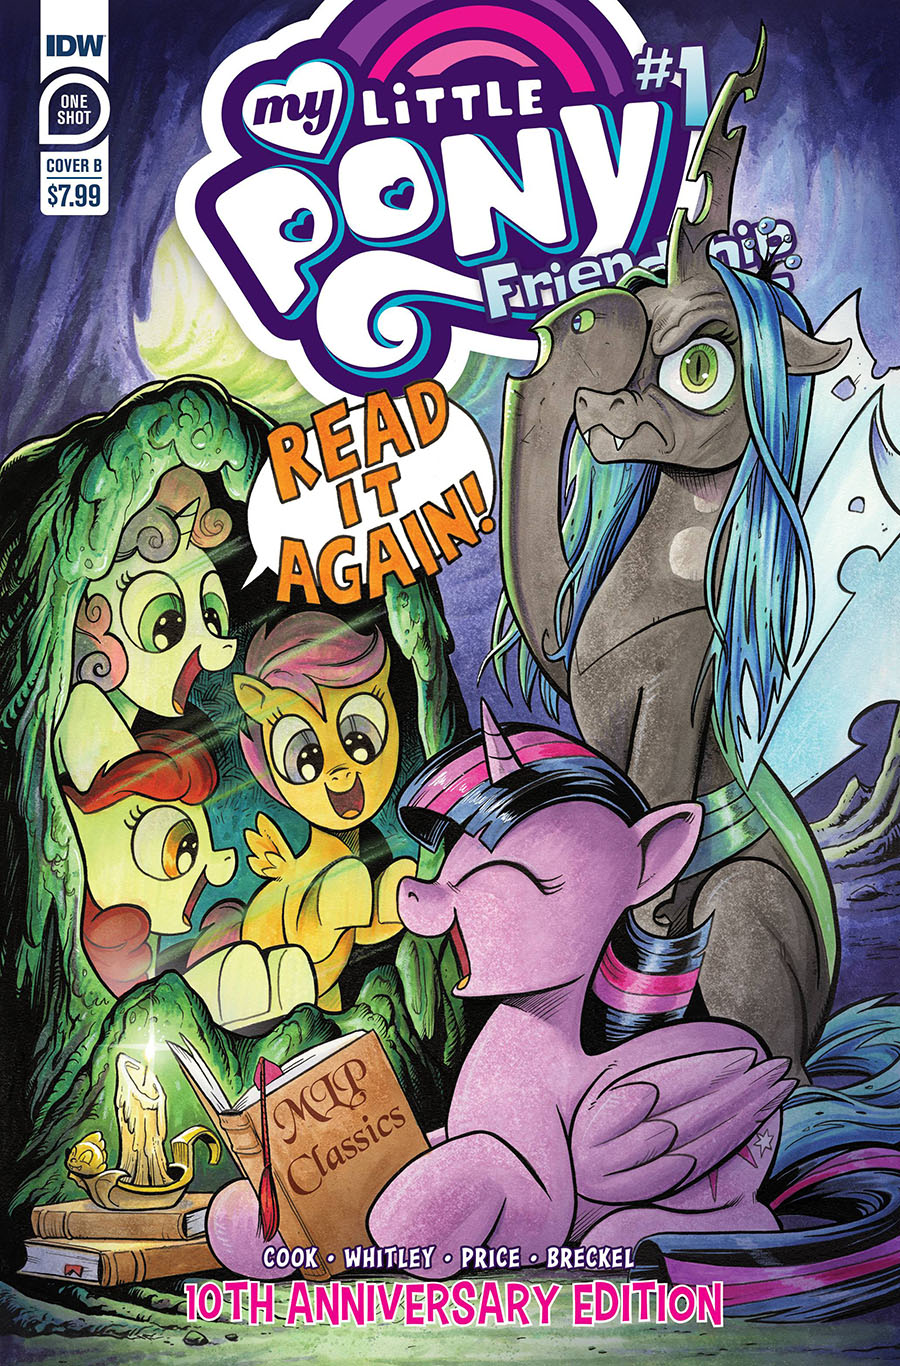 My Little Pony Friendship Is Magic 10th Anniversary Edition #1 (One Shot) Cover B Variant Andy Price Cover